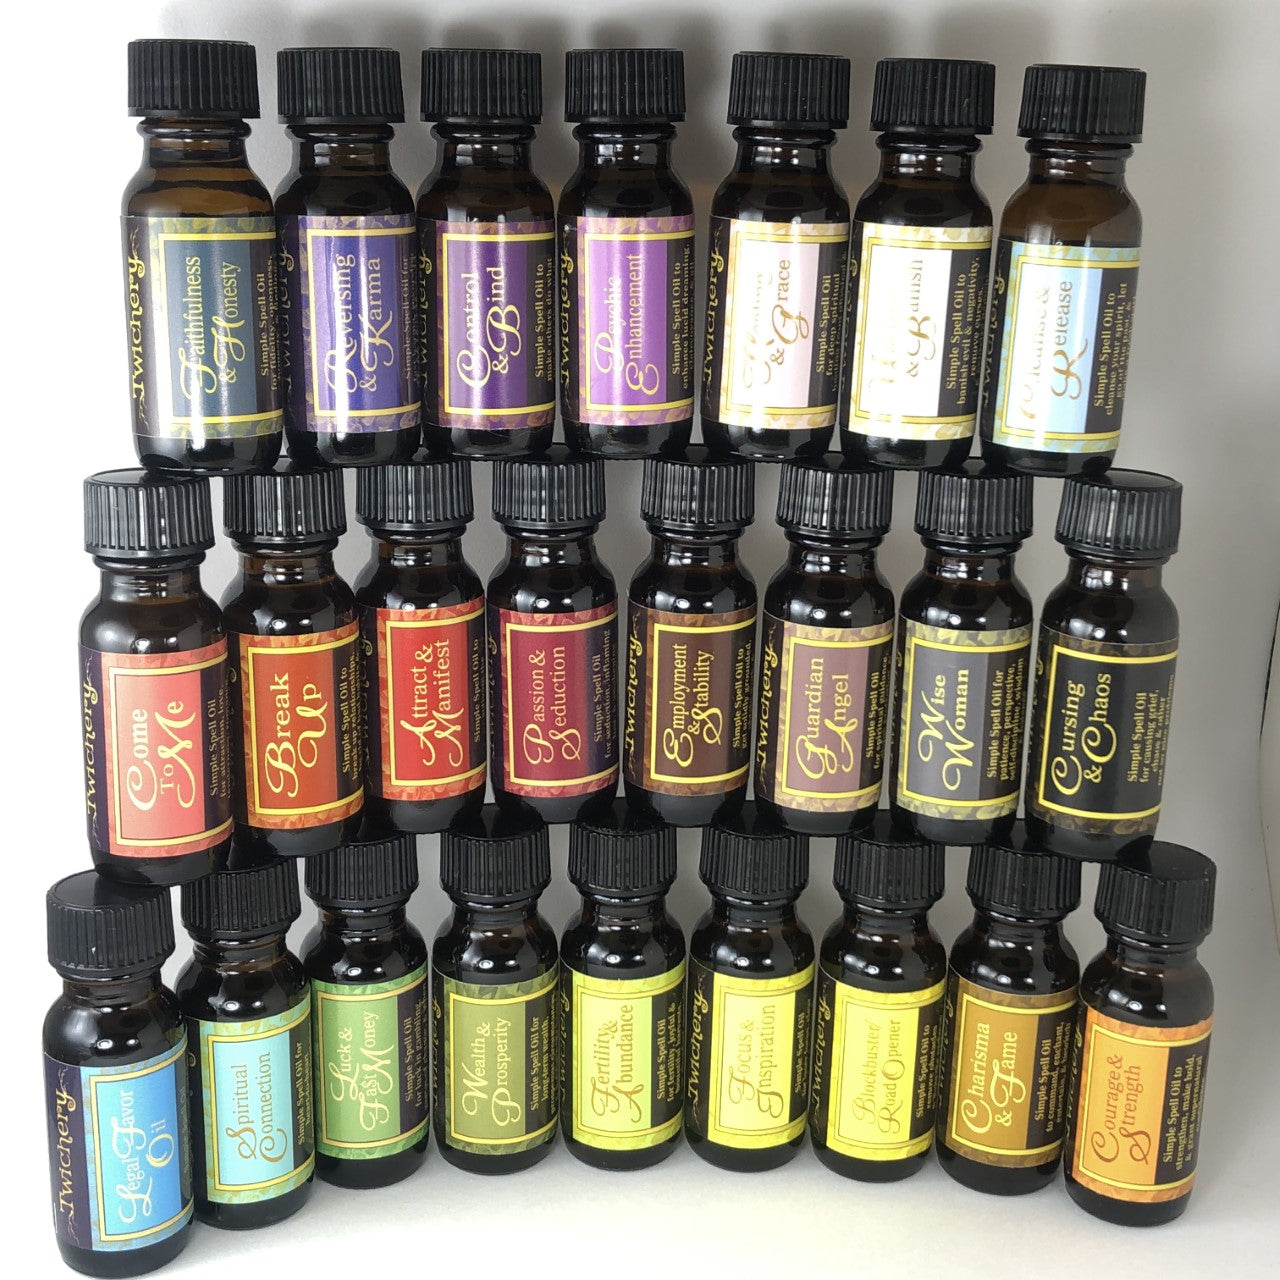 Twichery Quikspell Oils for luck in every area of your life. Beautifully collectible! Legal Favor Quikspell Oil pictured with all other Twichery Quikspell Oils! Hoodoo, Voodoo, Wicca, Pagan